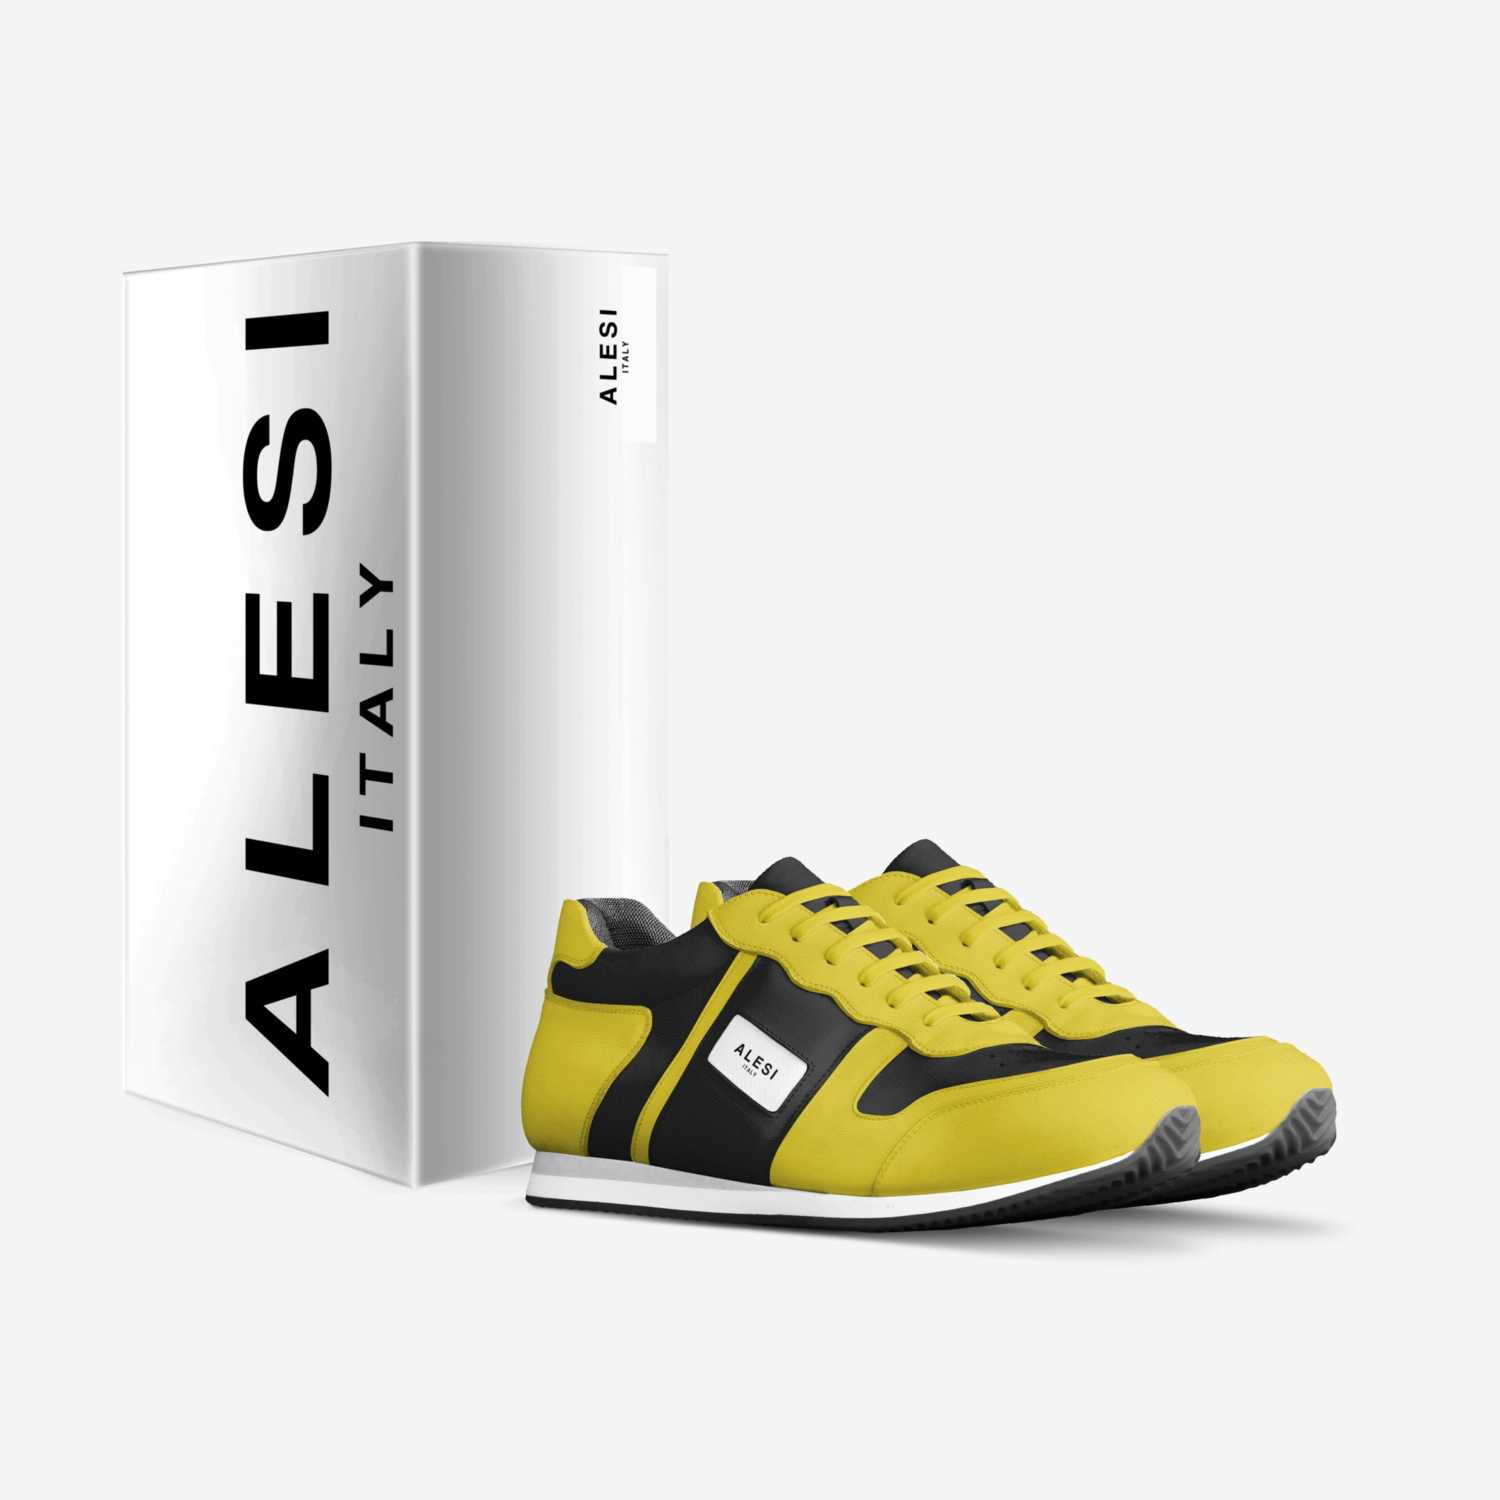 Alesi Runner II custom made in Italy shoes by Lonanthony Parker | Box view